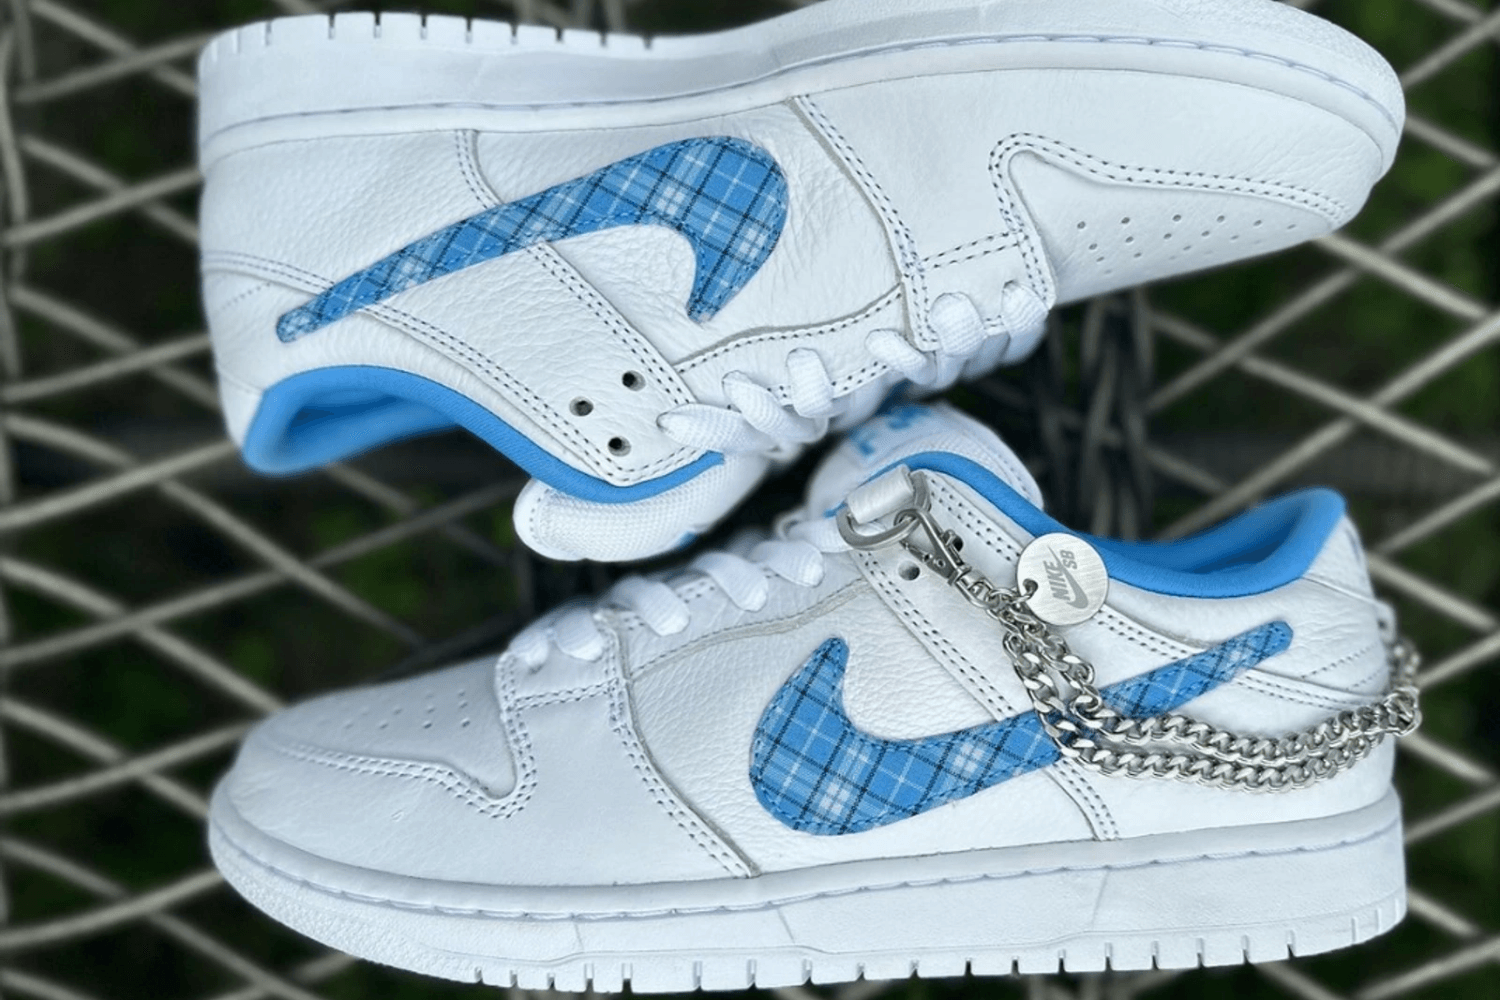 Nicole Hause unveils her first Nike SB Dunk Low collab